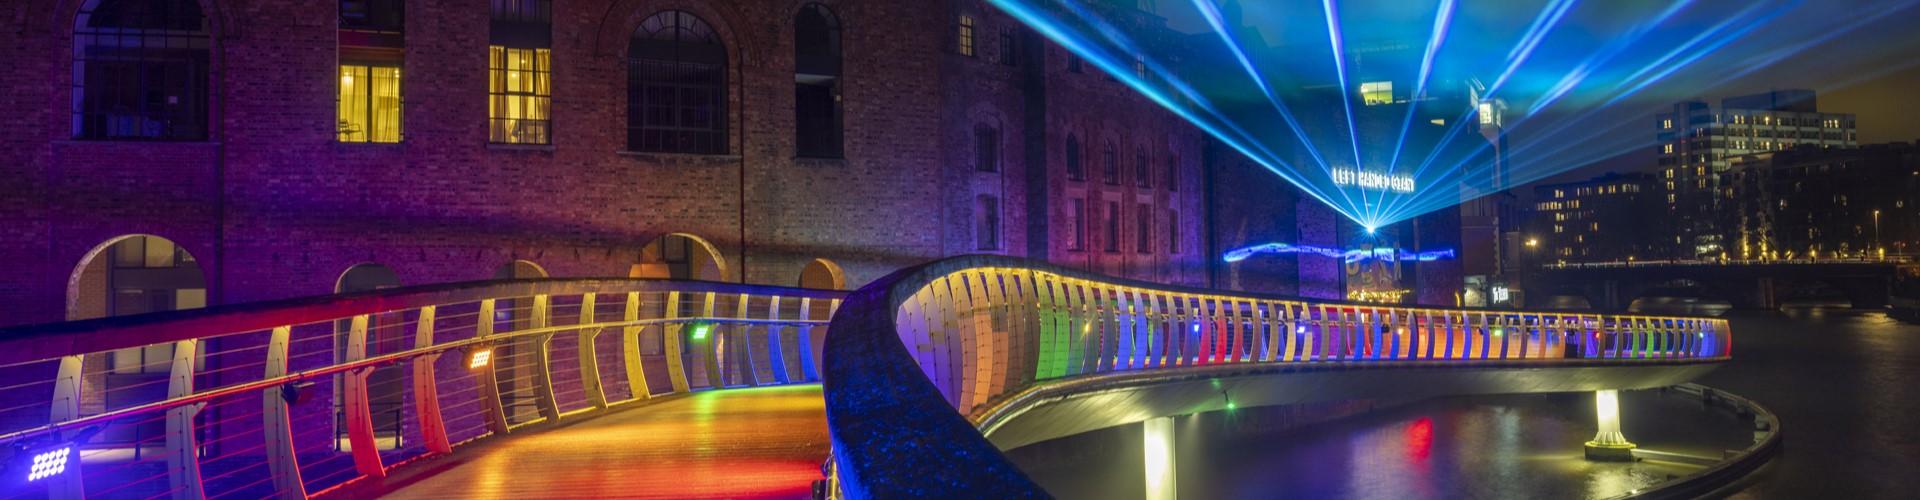 Bridge illuminated in different colours over the water at night, as part of Bristol Light Festival. Image credit: Andre Pattenden.